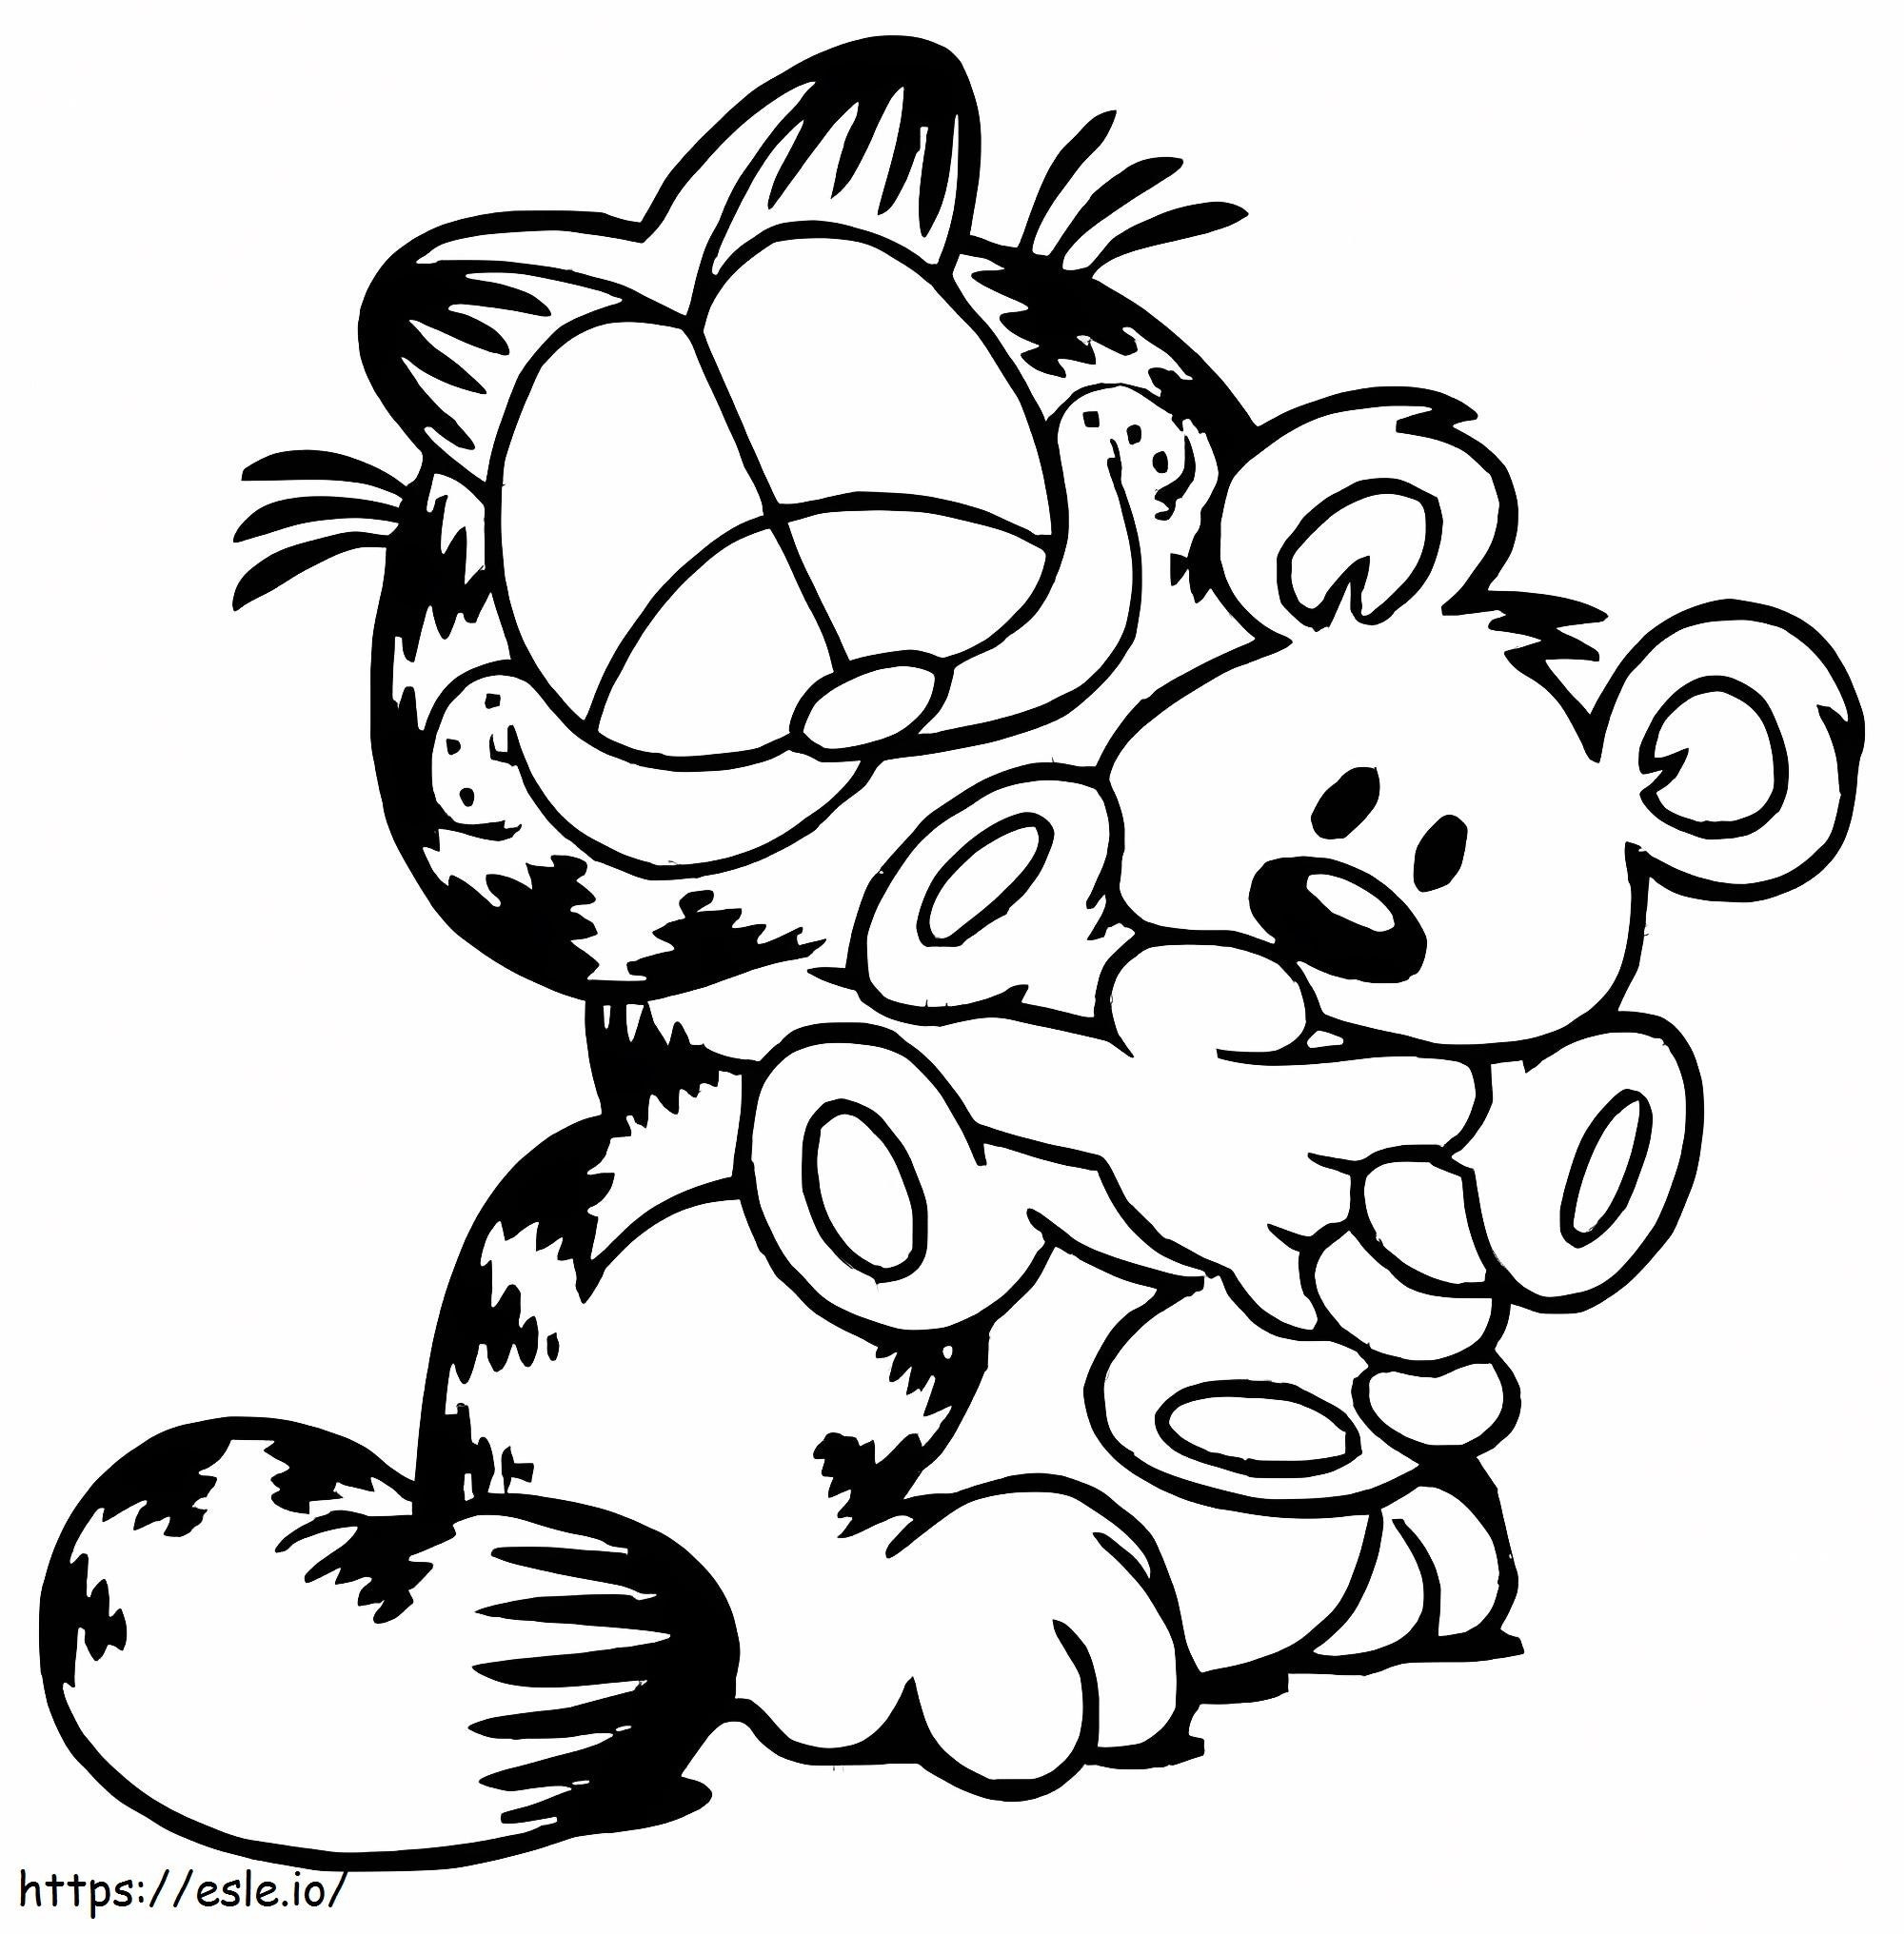 Happy Garfield Holding Teddy Bear coloring page